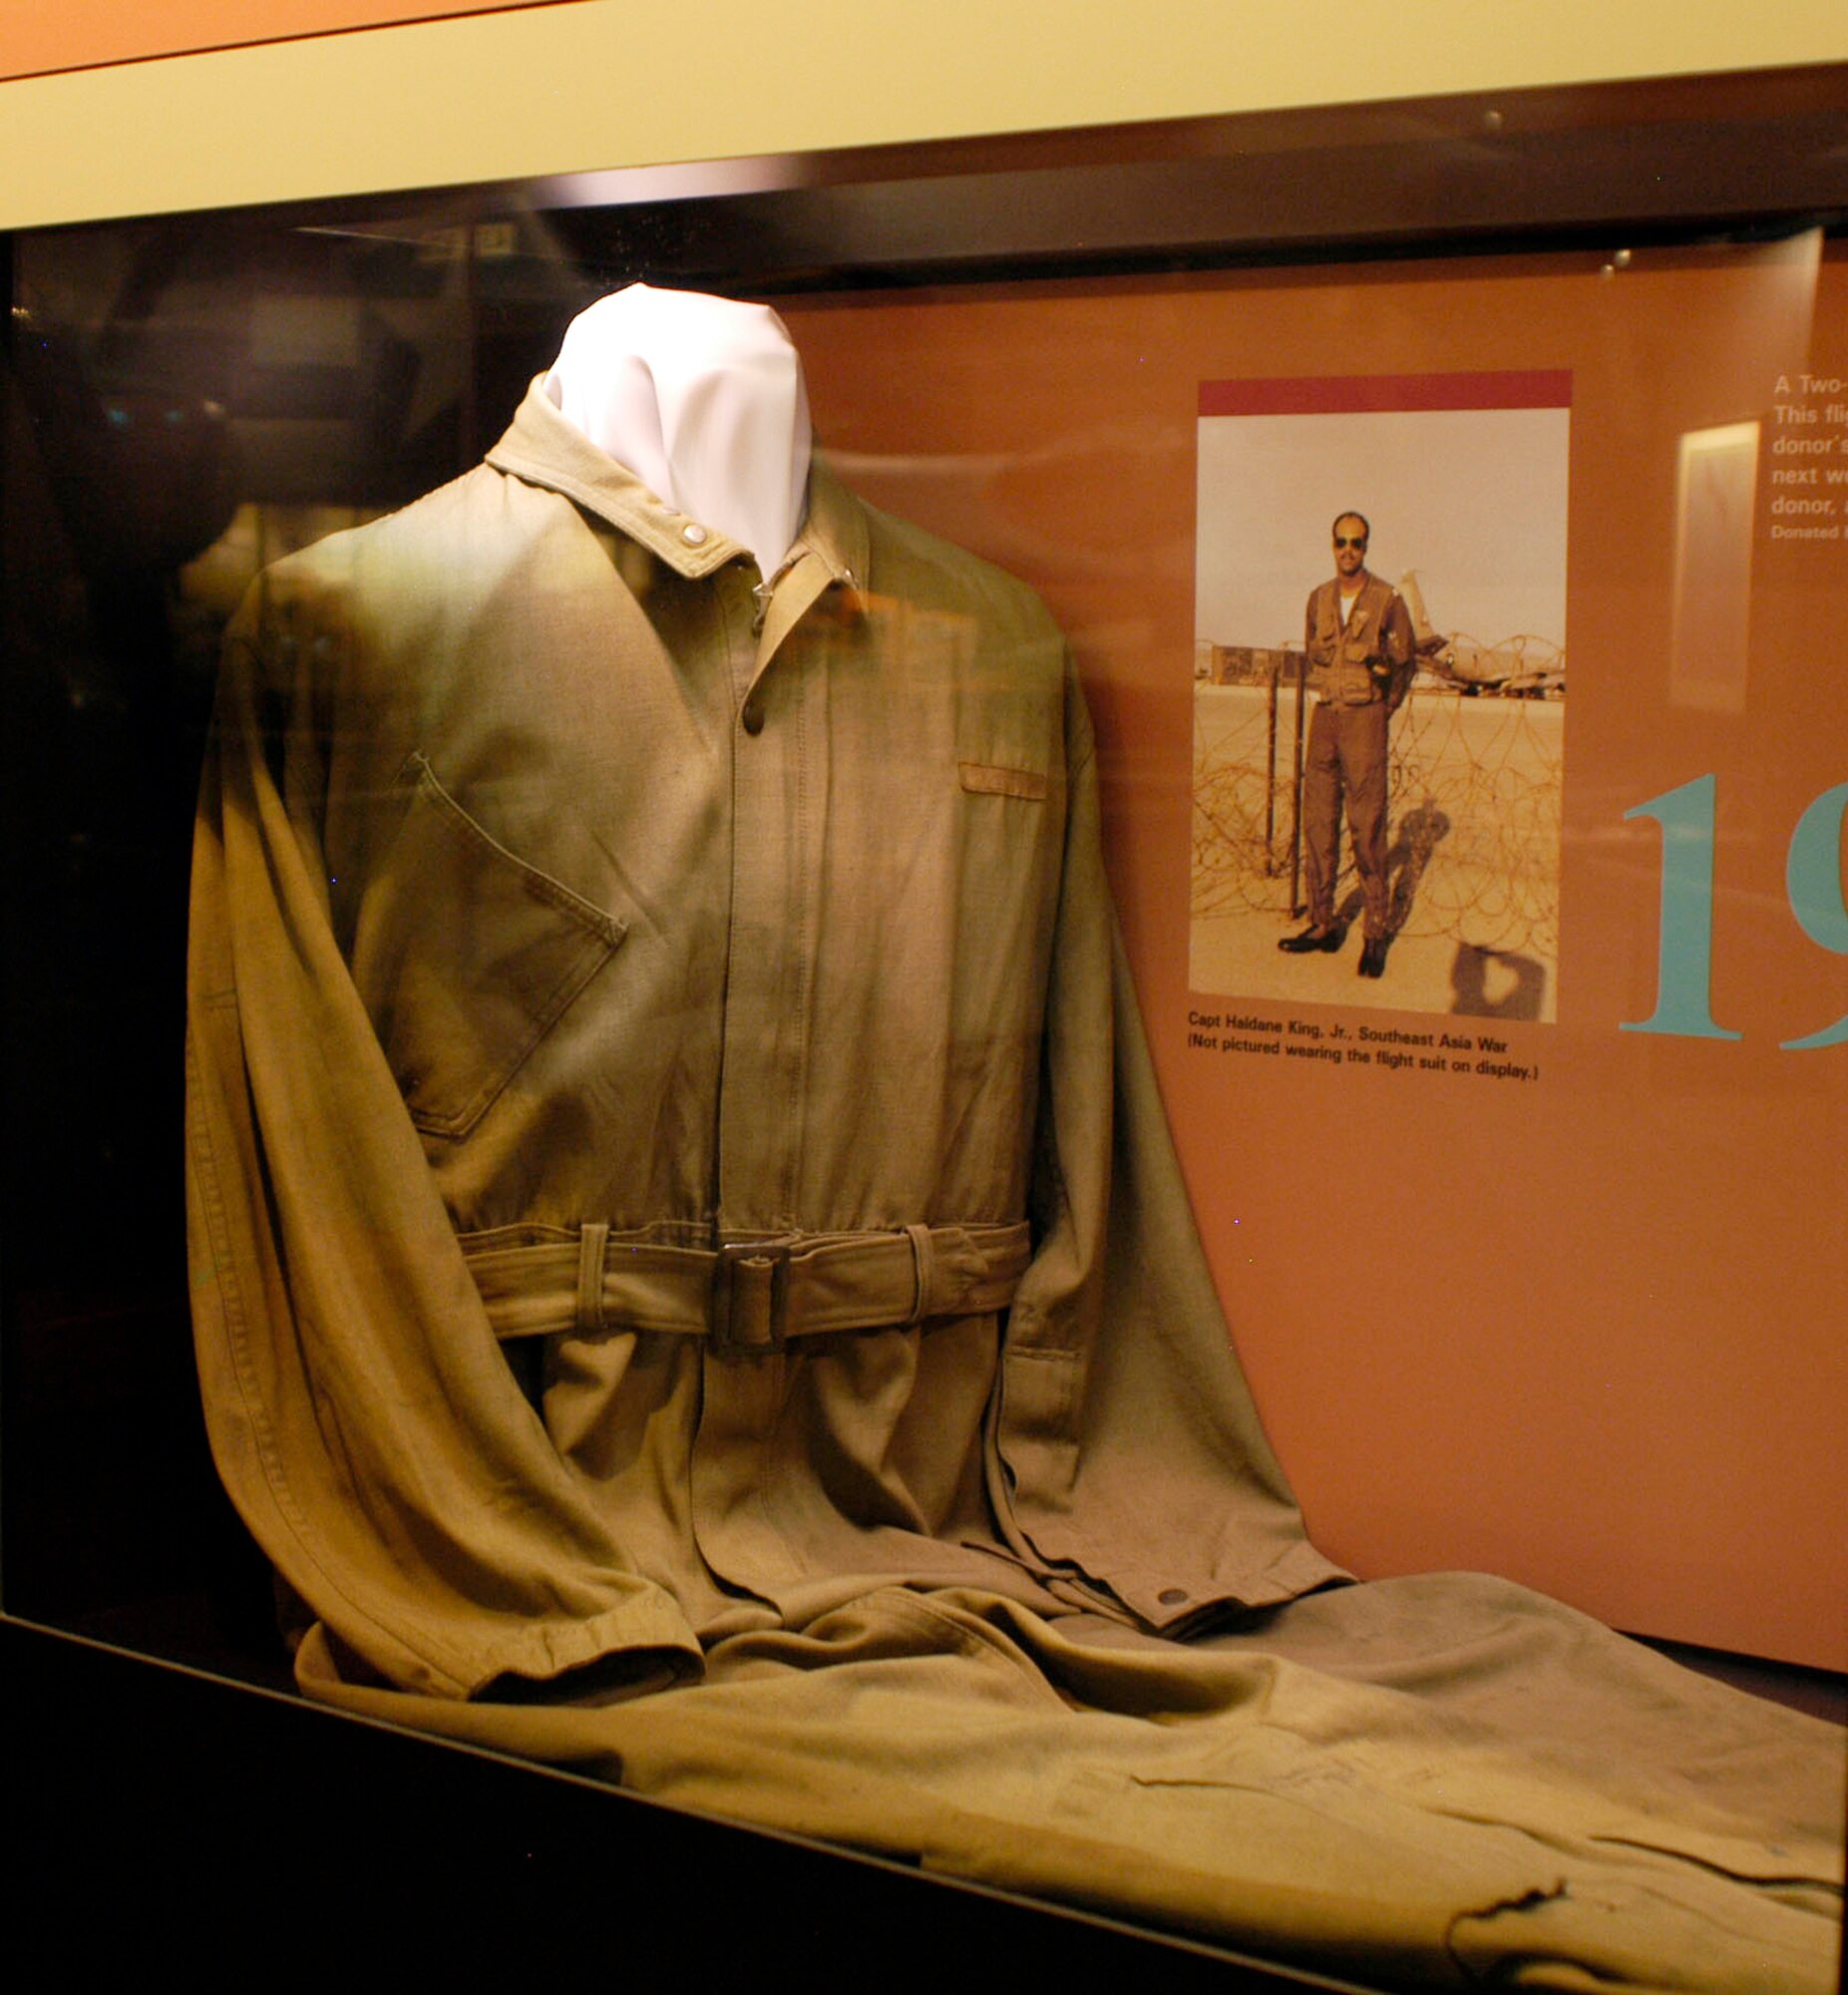 A flightsuit worn in two different wars by a father and son combination is on display in the Air Power Gallery at the National Museum of the U.S. Air Force in Dayton, Ohio. The suit was worn by a father during World War II and his son during the Vietnam War. (U.S. Air Force photo)